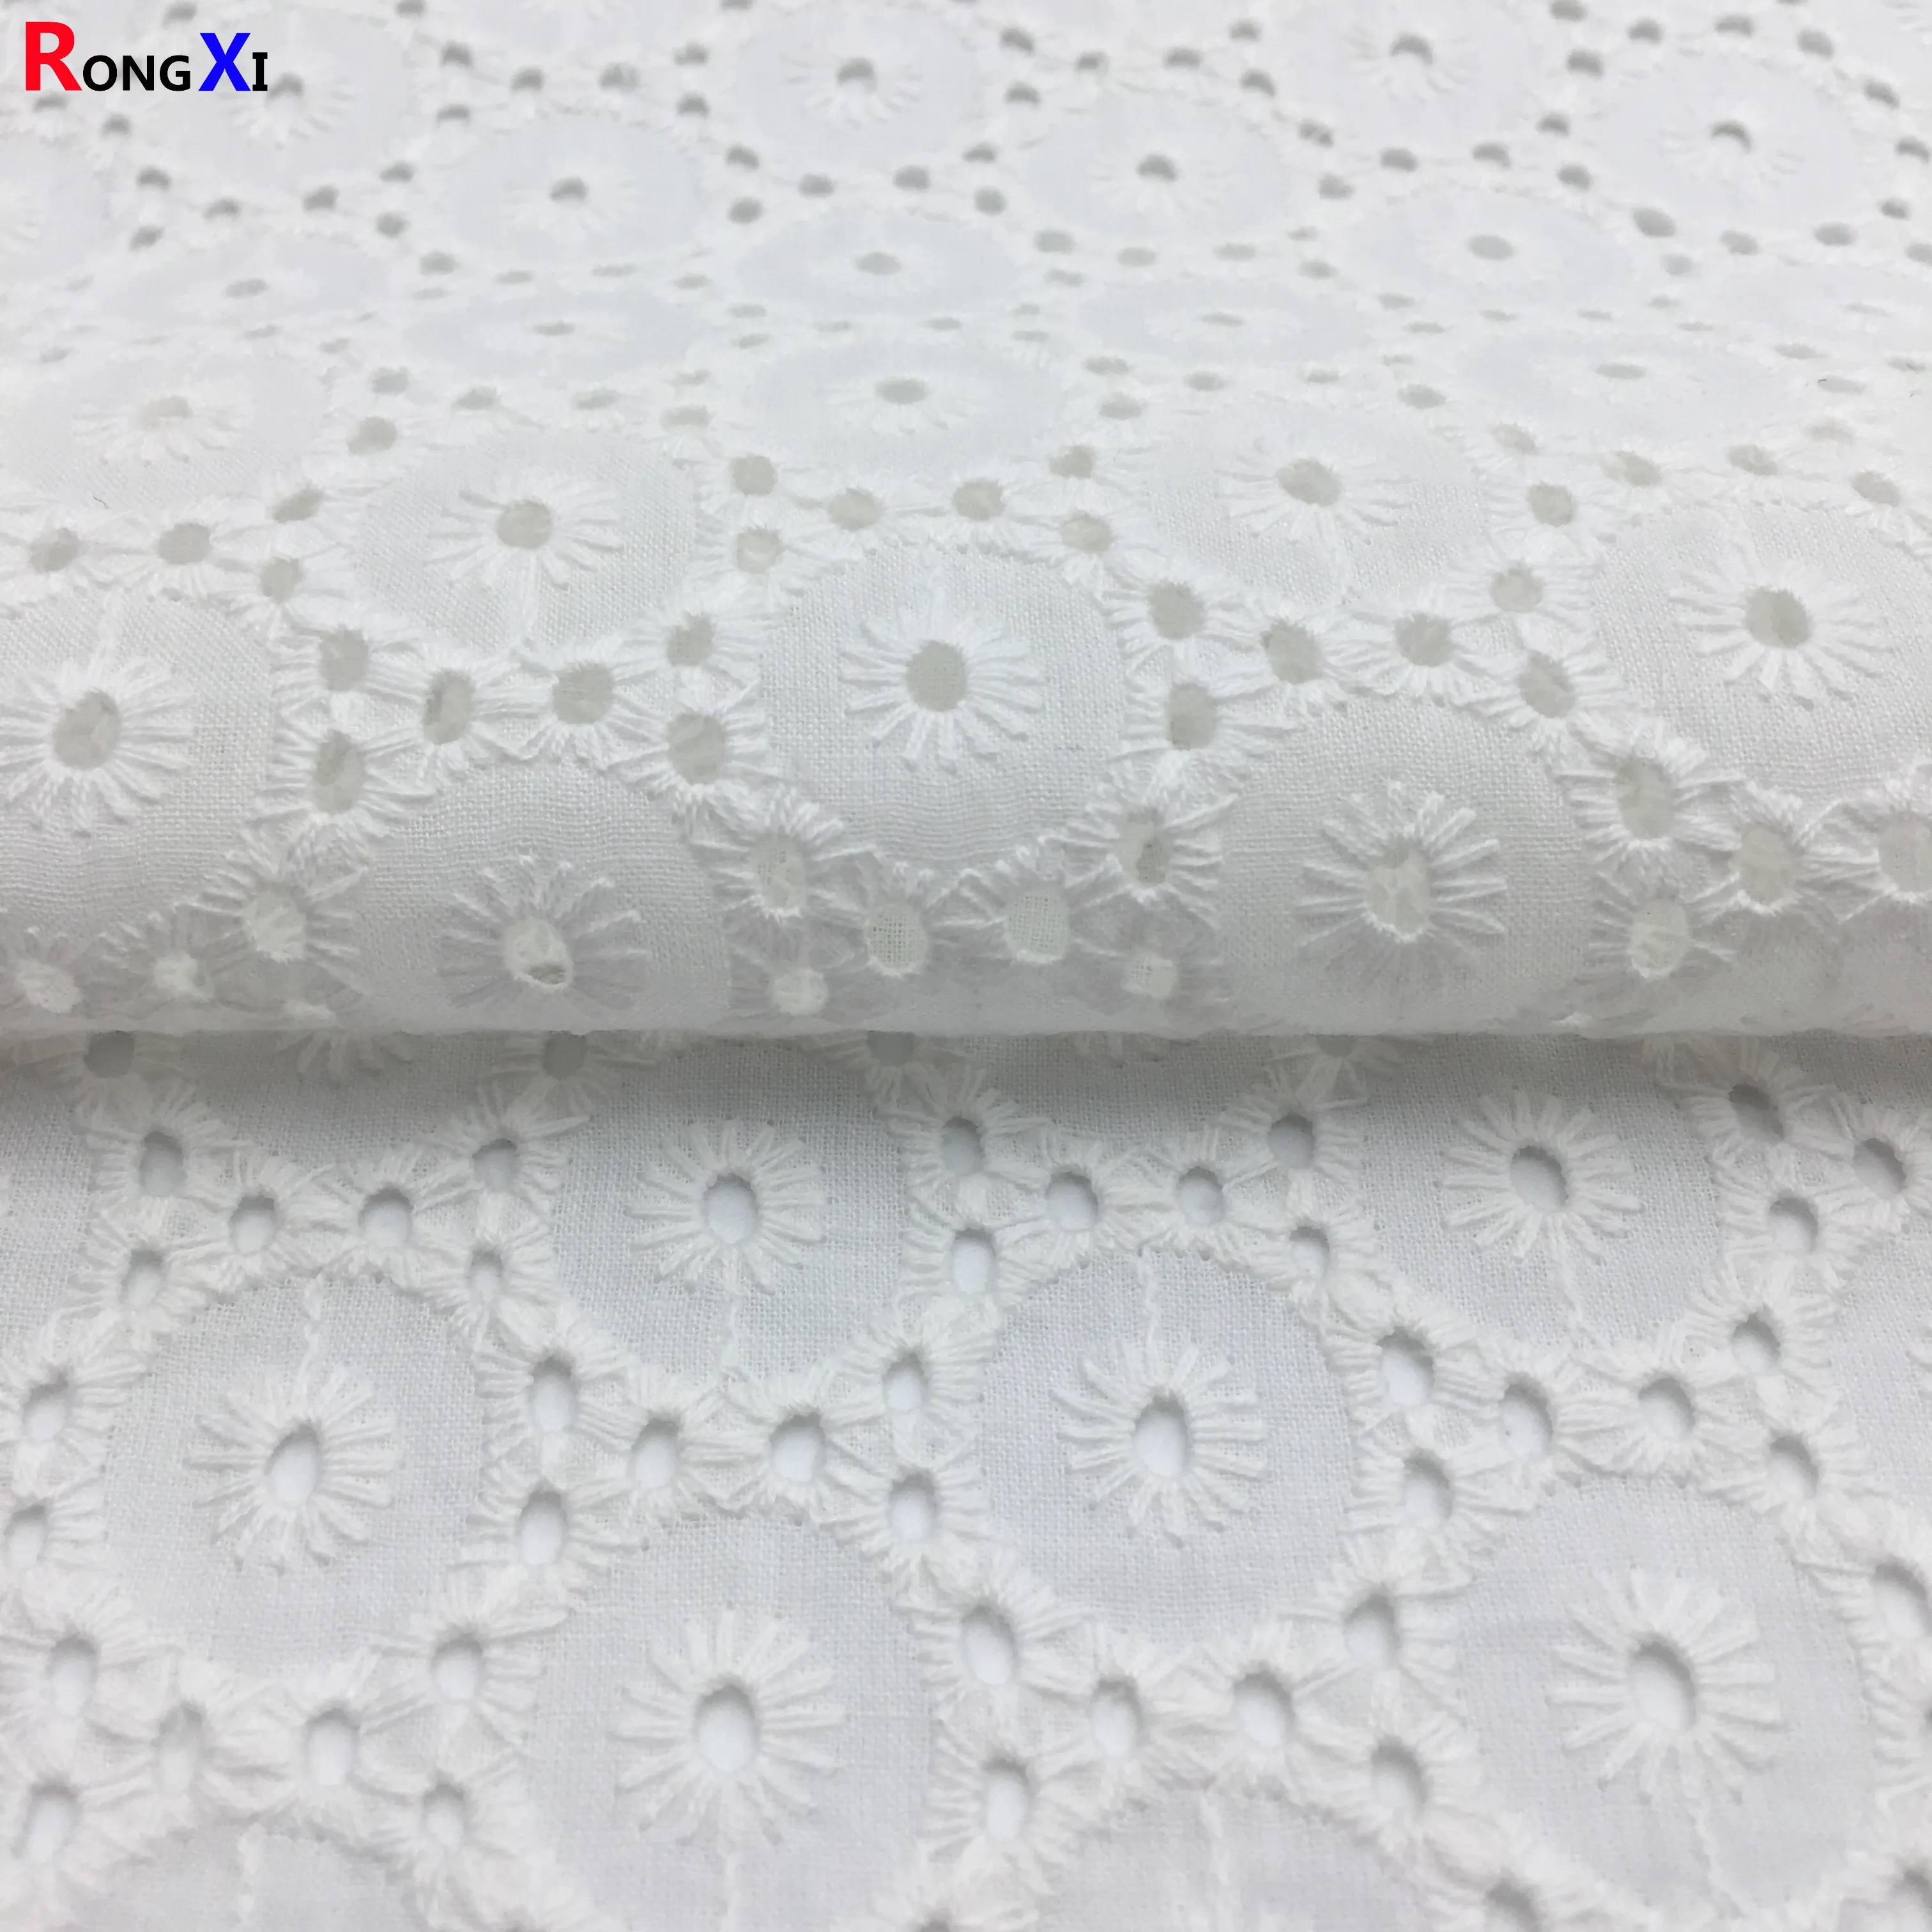 Rxf0506 Brand New Polished 210gsm Lyocell Cotton White Eyelet Embroidery broderie anglaise Lace Voile Fabric For Dresses